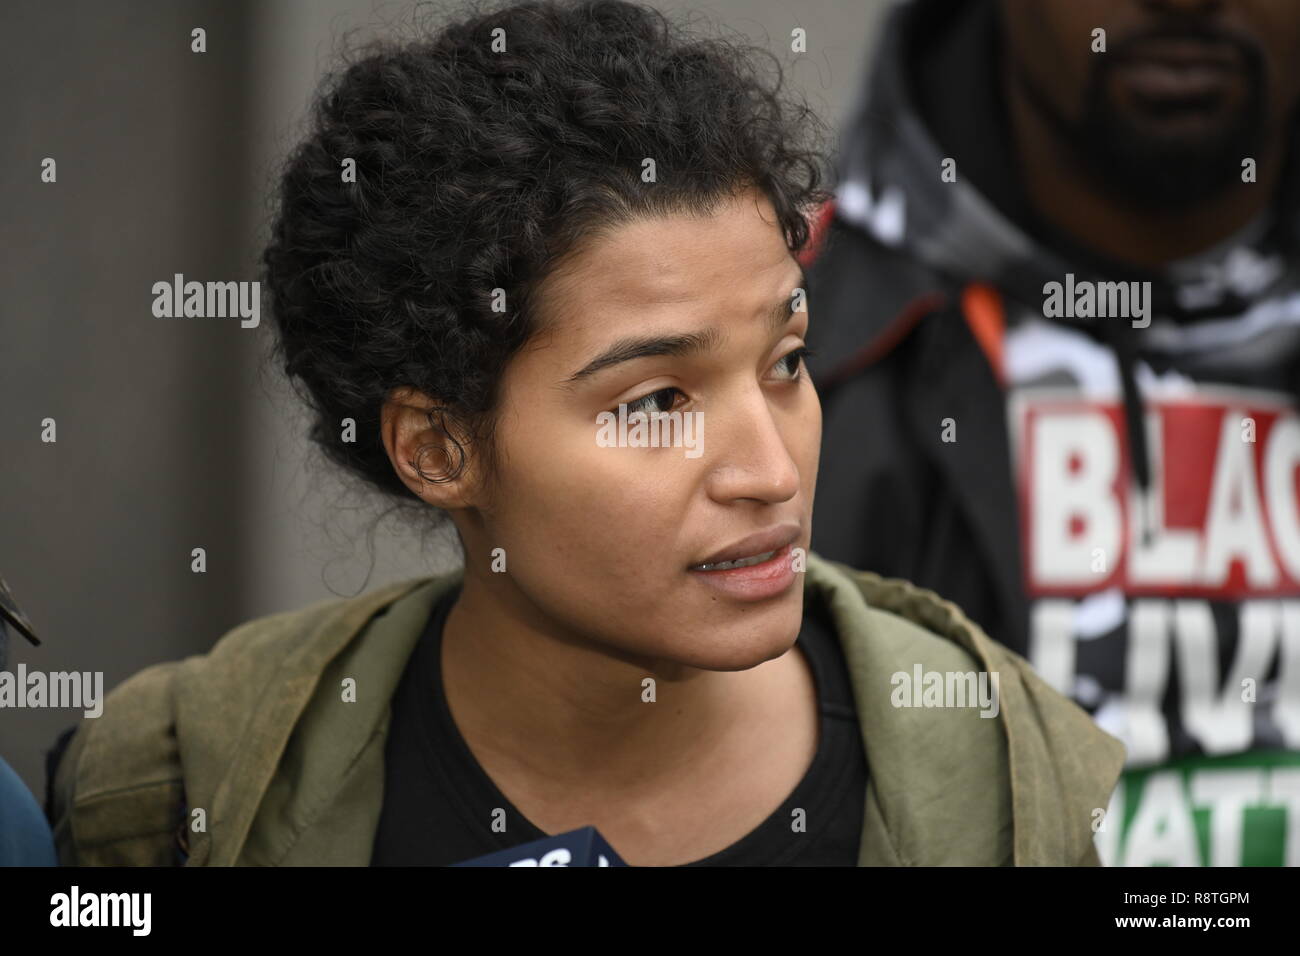 New York, USA. 17th Dec, 2018. New York, U.S., 17 December 2018 Actress and model Indya Moore speaks in support of Statue of Liberty climber Patricia outside federal court following Okoumou's conviction by a federal magistrate judge on misdemeanor charges of trespassing, disorderly conduct, and interfering with the functioning of government for her act of civil disobedience on July 4. Okoumou climbed the base of the statue to protest against Trump administration immigration policies. She is to be sentenced on March 5, 2019. Credit: Joseph Reid/Alamy Live News Stock Photo